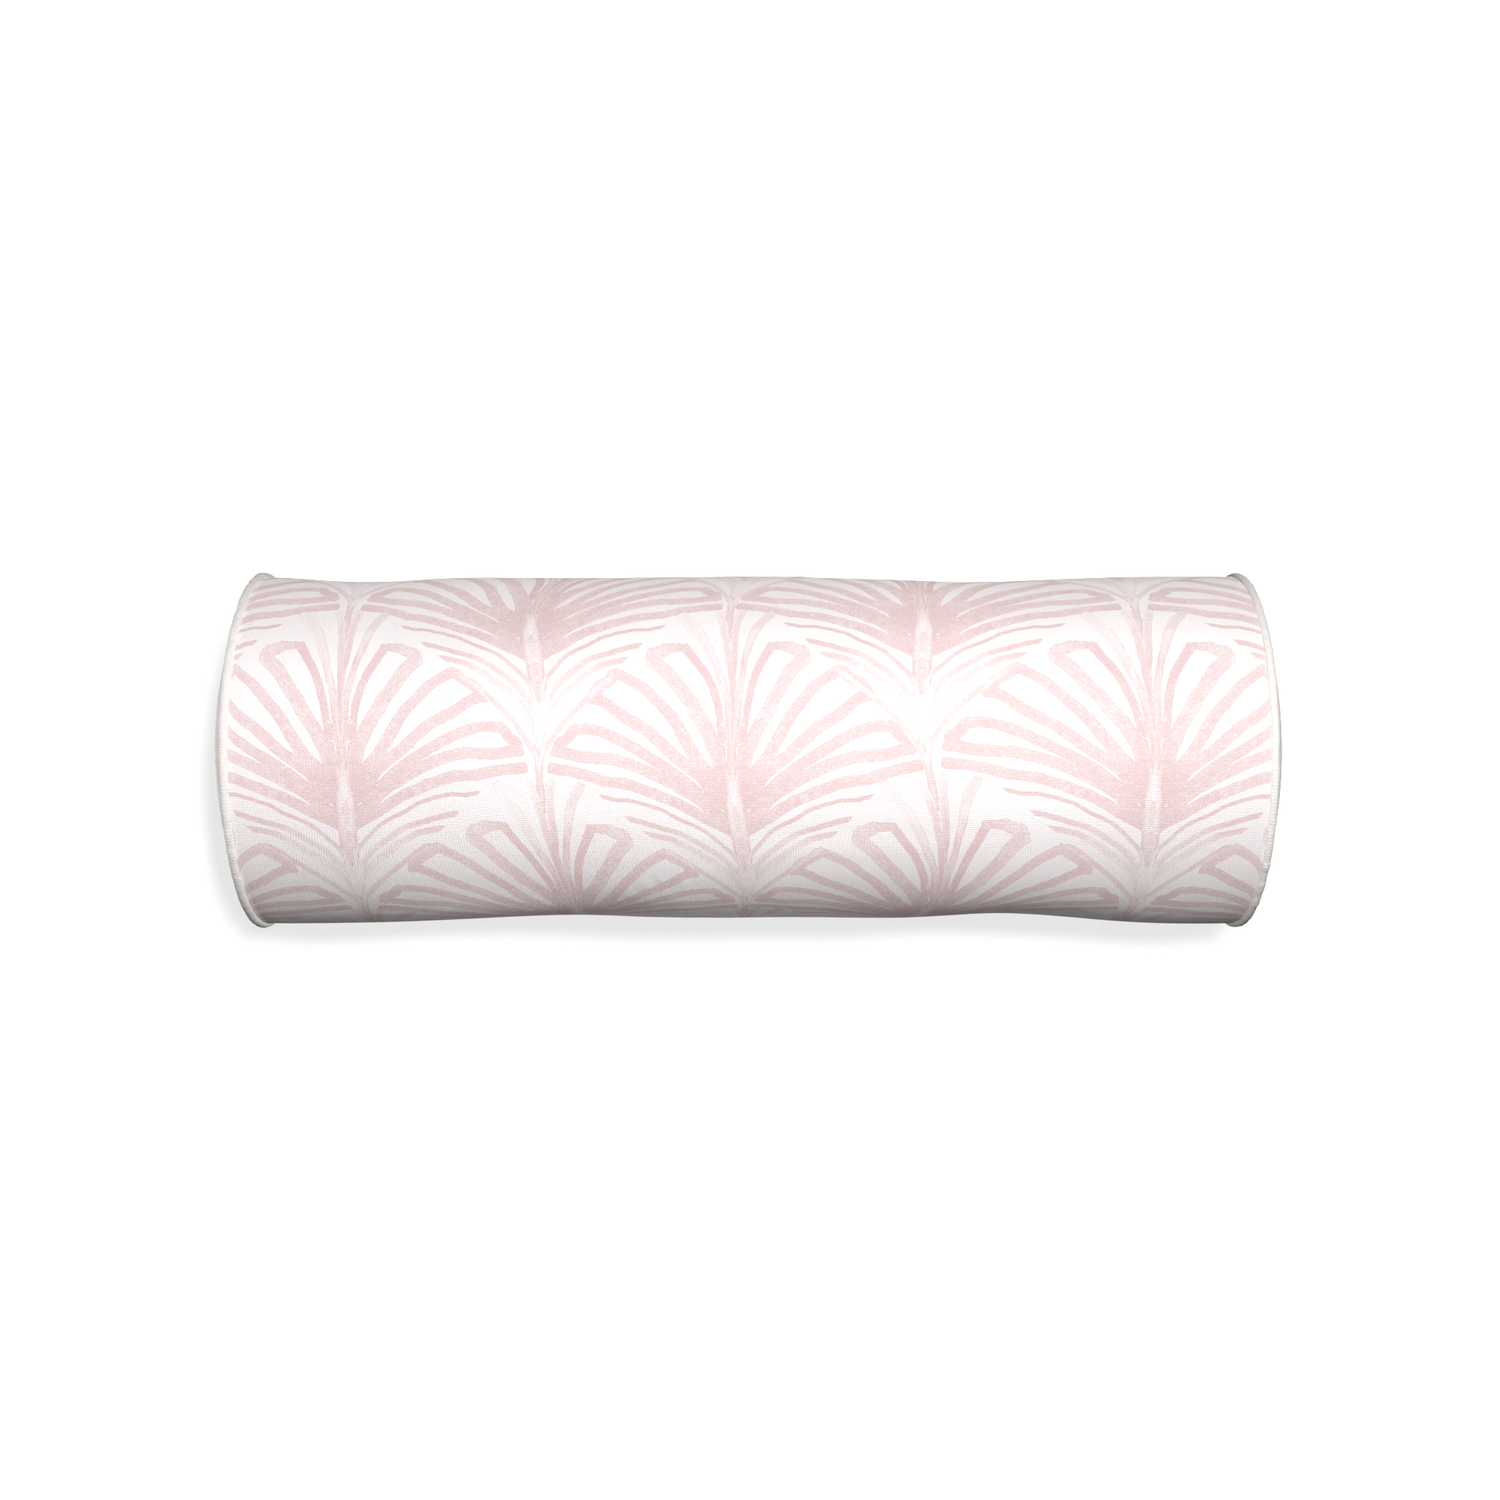 Bolster suzy rose custom pillow with snow piping on white background